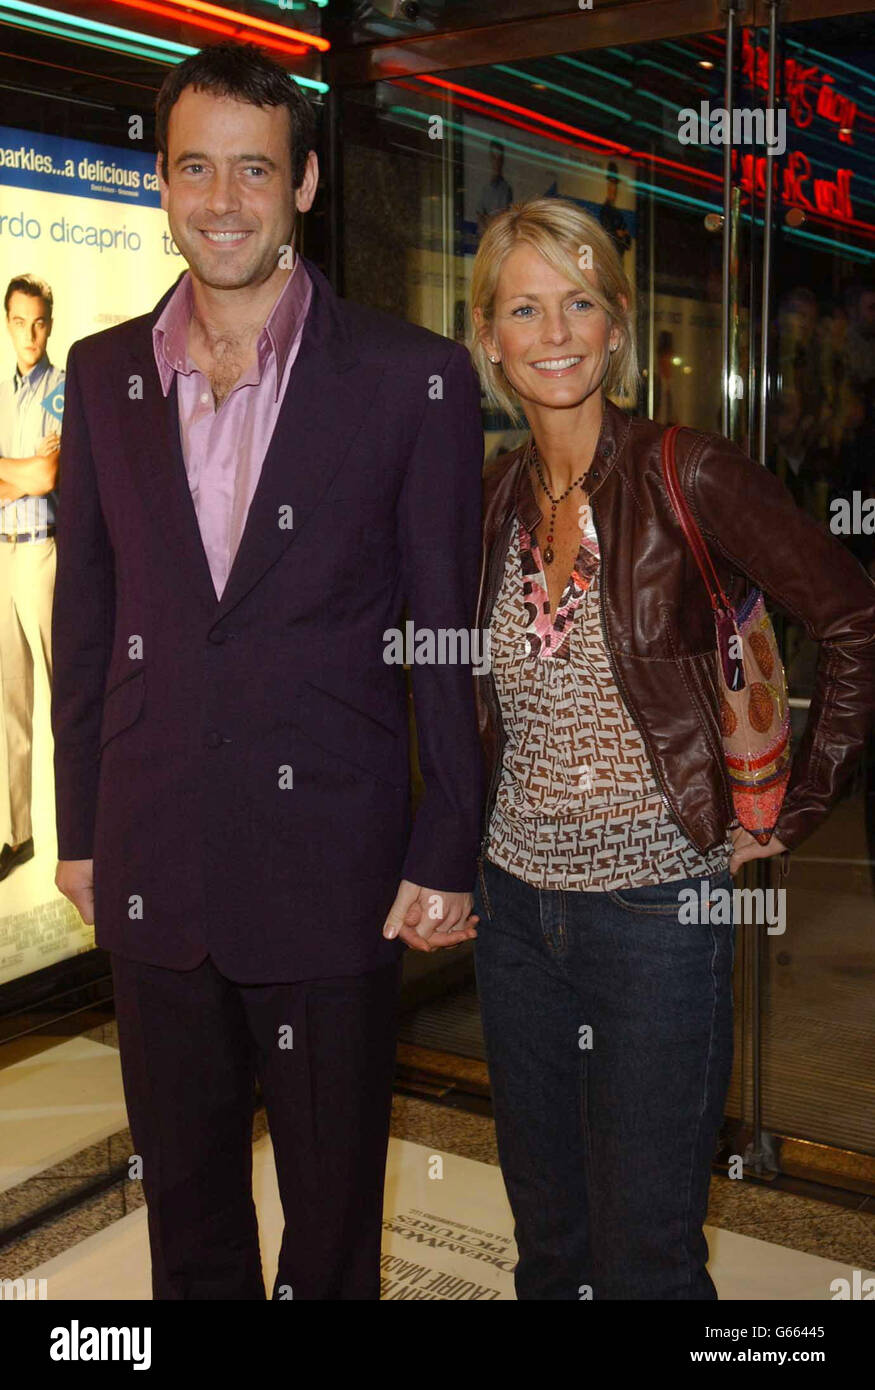 TV presenter Ulrika Jonsson and Lance Gerard-Wright arrive for UK premiere of Steven Spielberg's 'Catch Me If You Can' at the Empire Cinema, Leicester Square in London. 04/05/2003: Jonsson is set to marry her Mr Right - the eligible bachelor she met while presenting a television dating show last year, her agent confirmed, Sunday May 4, 2003. Jonsson, who has suffered a string of high profile failed relationships, started dating former Army officer Lance Gerrard-Wright after they hit if off during ITV1's love search Mr Right, in which he was the prize. 15/6/03: Jonsson who told in an interview Stock Photo